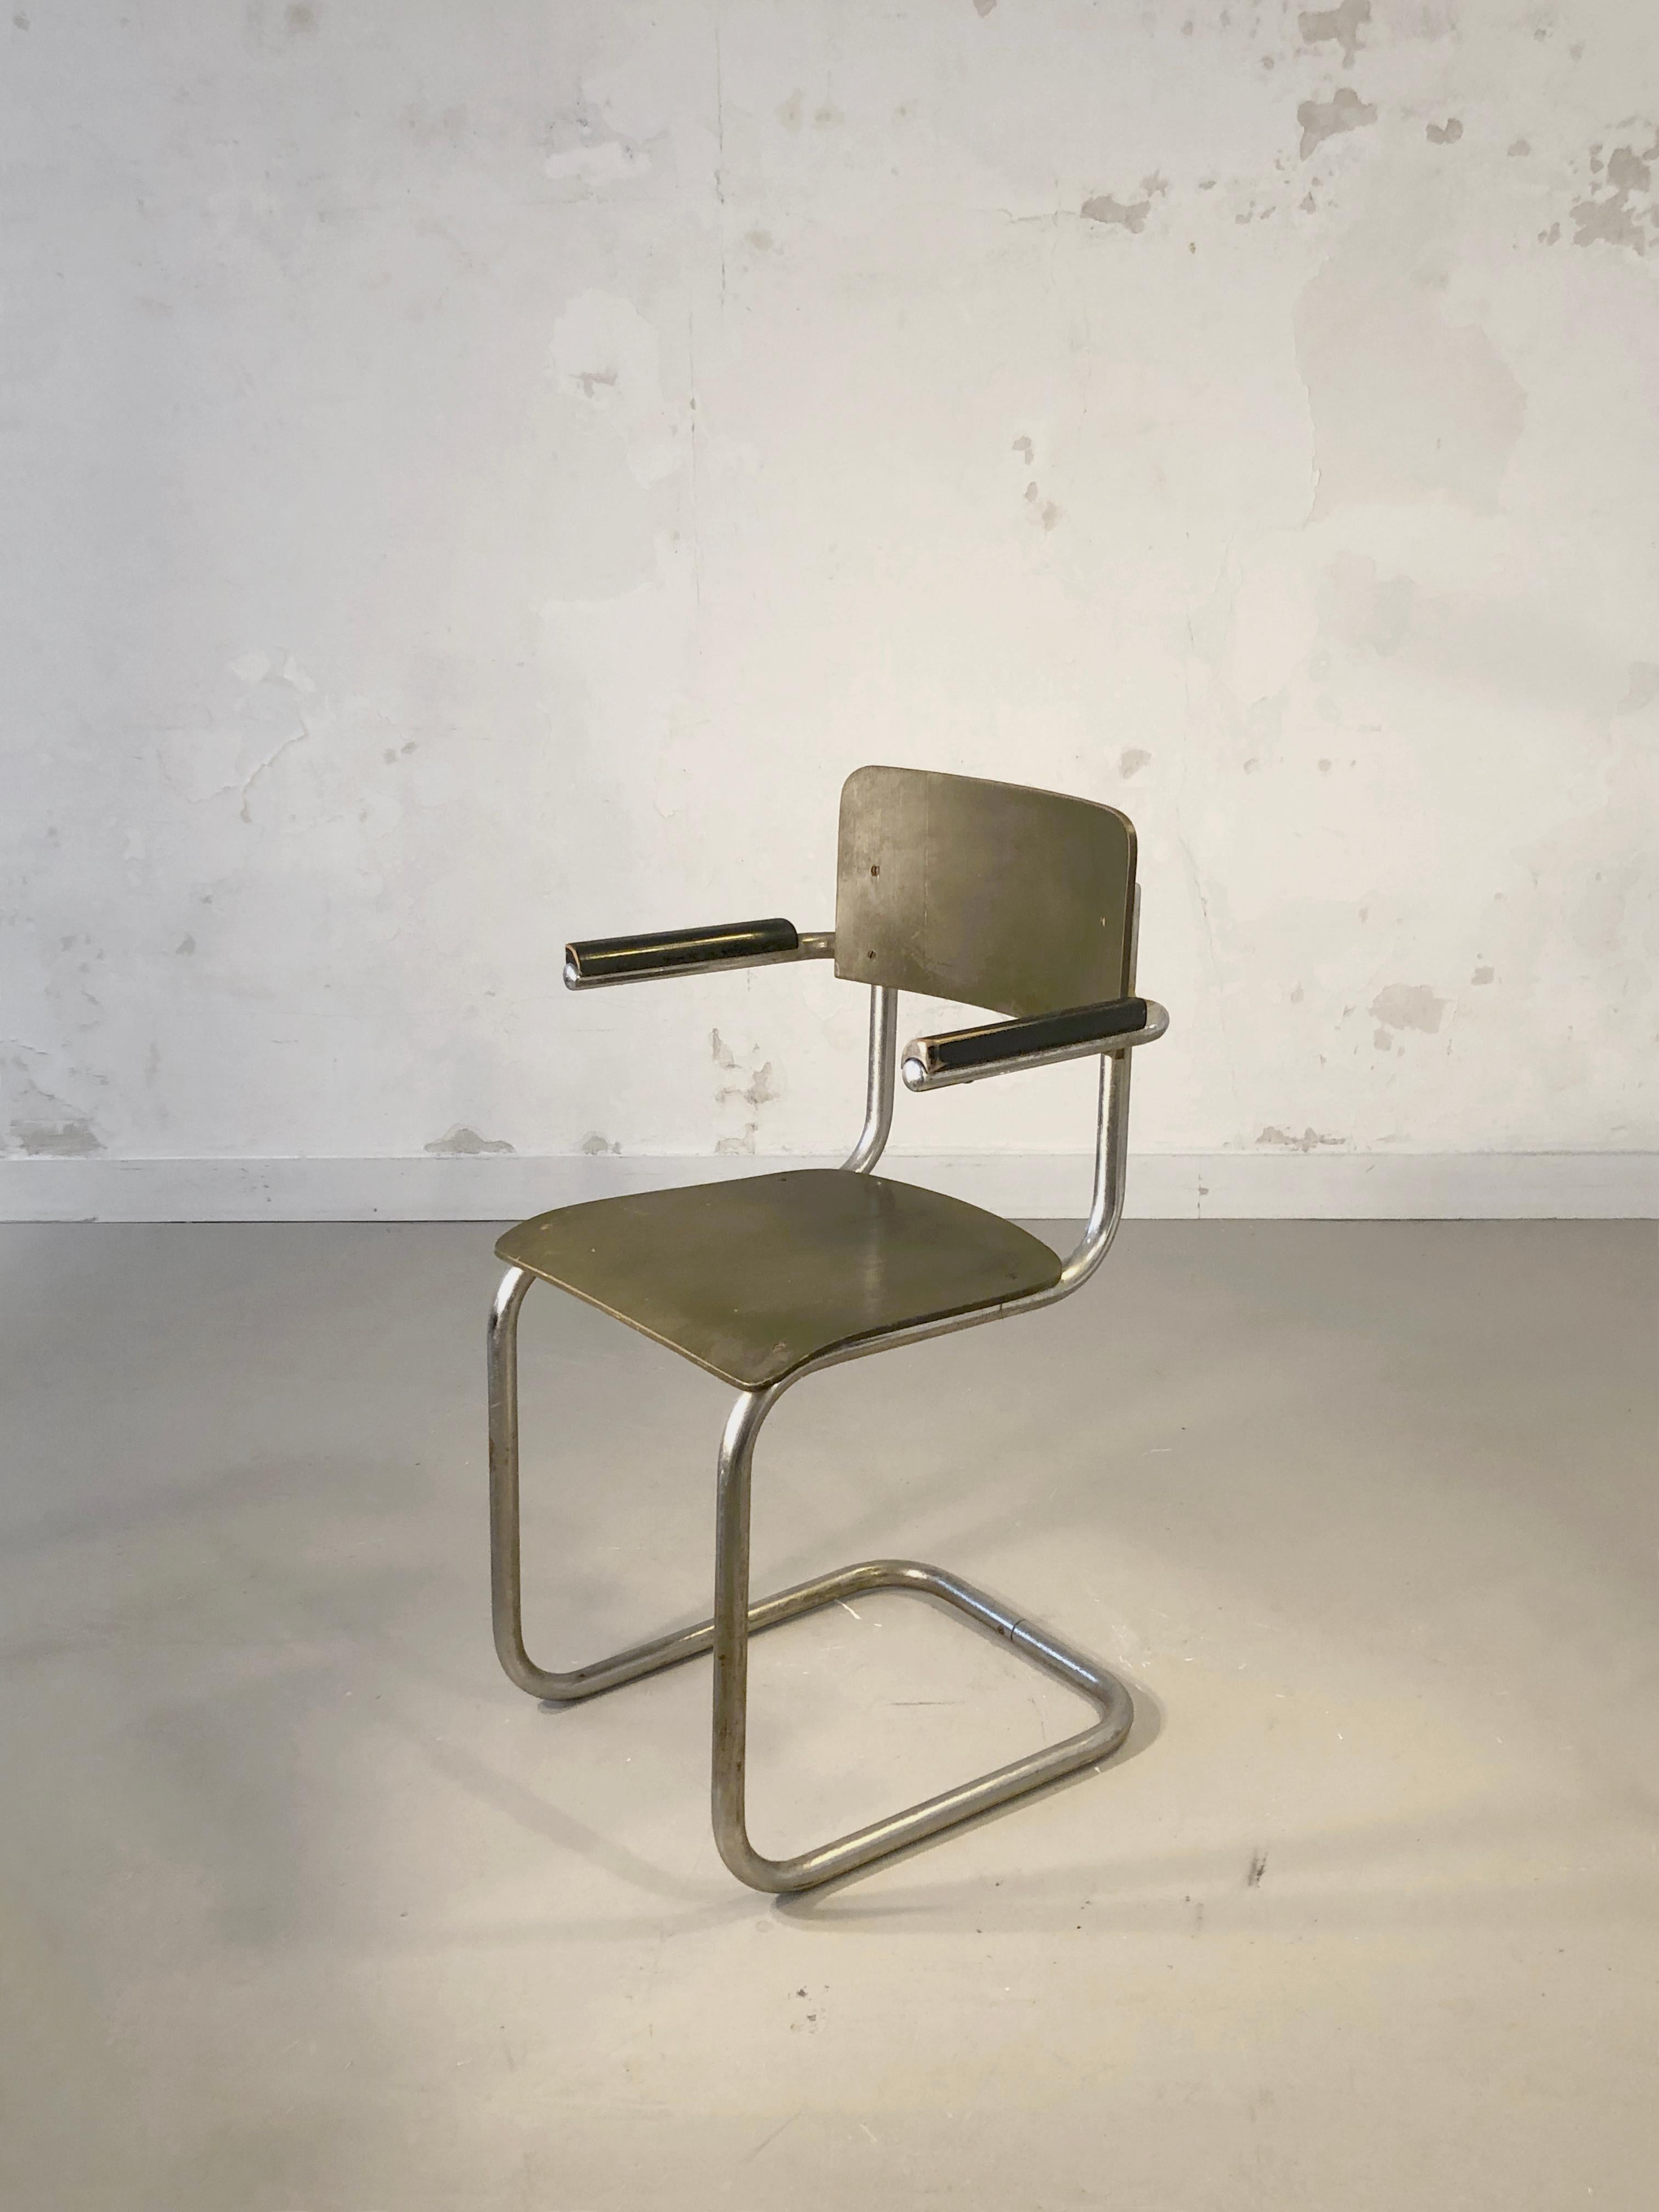 An iconic early modernist minimal chair from the Bauhaus : tubular metal structure, black and kaki lacquered plywood seat and back, 